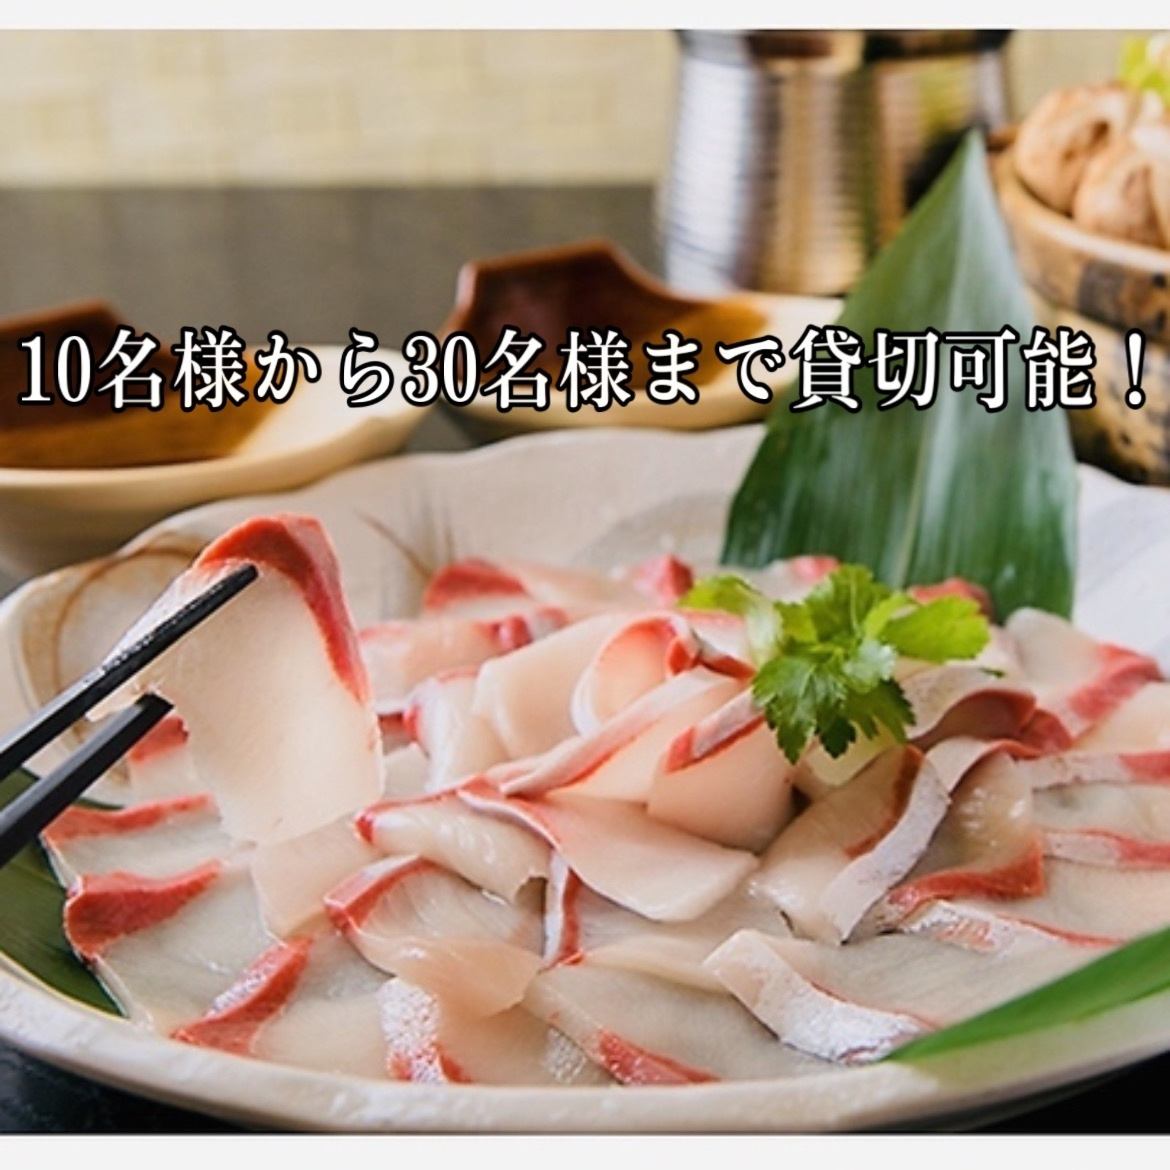 Enjoy creative Japanese cuisine in a comfortable and homely space♪